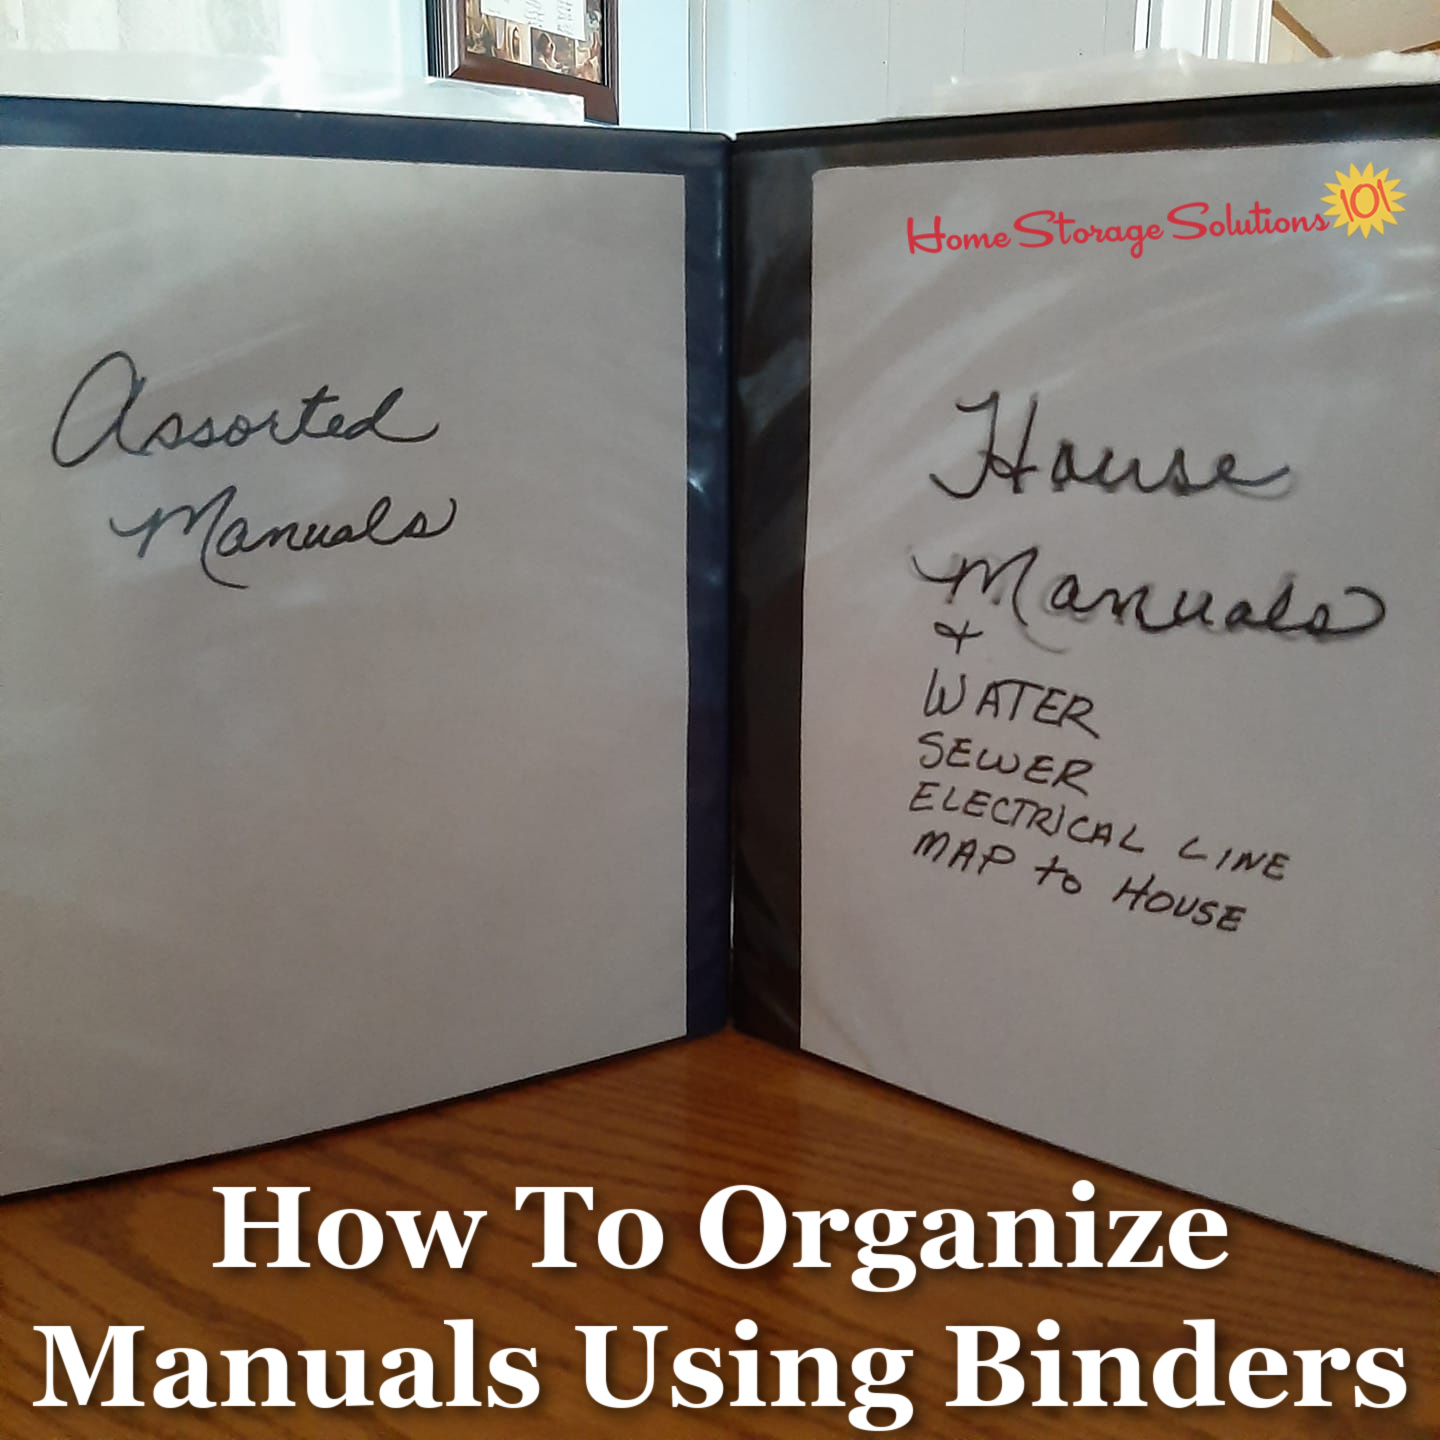 How to organize manuals in a binder, to organize these documents for reference in your home {featured on Home Storage Solutions 101}